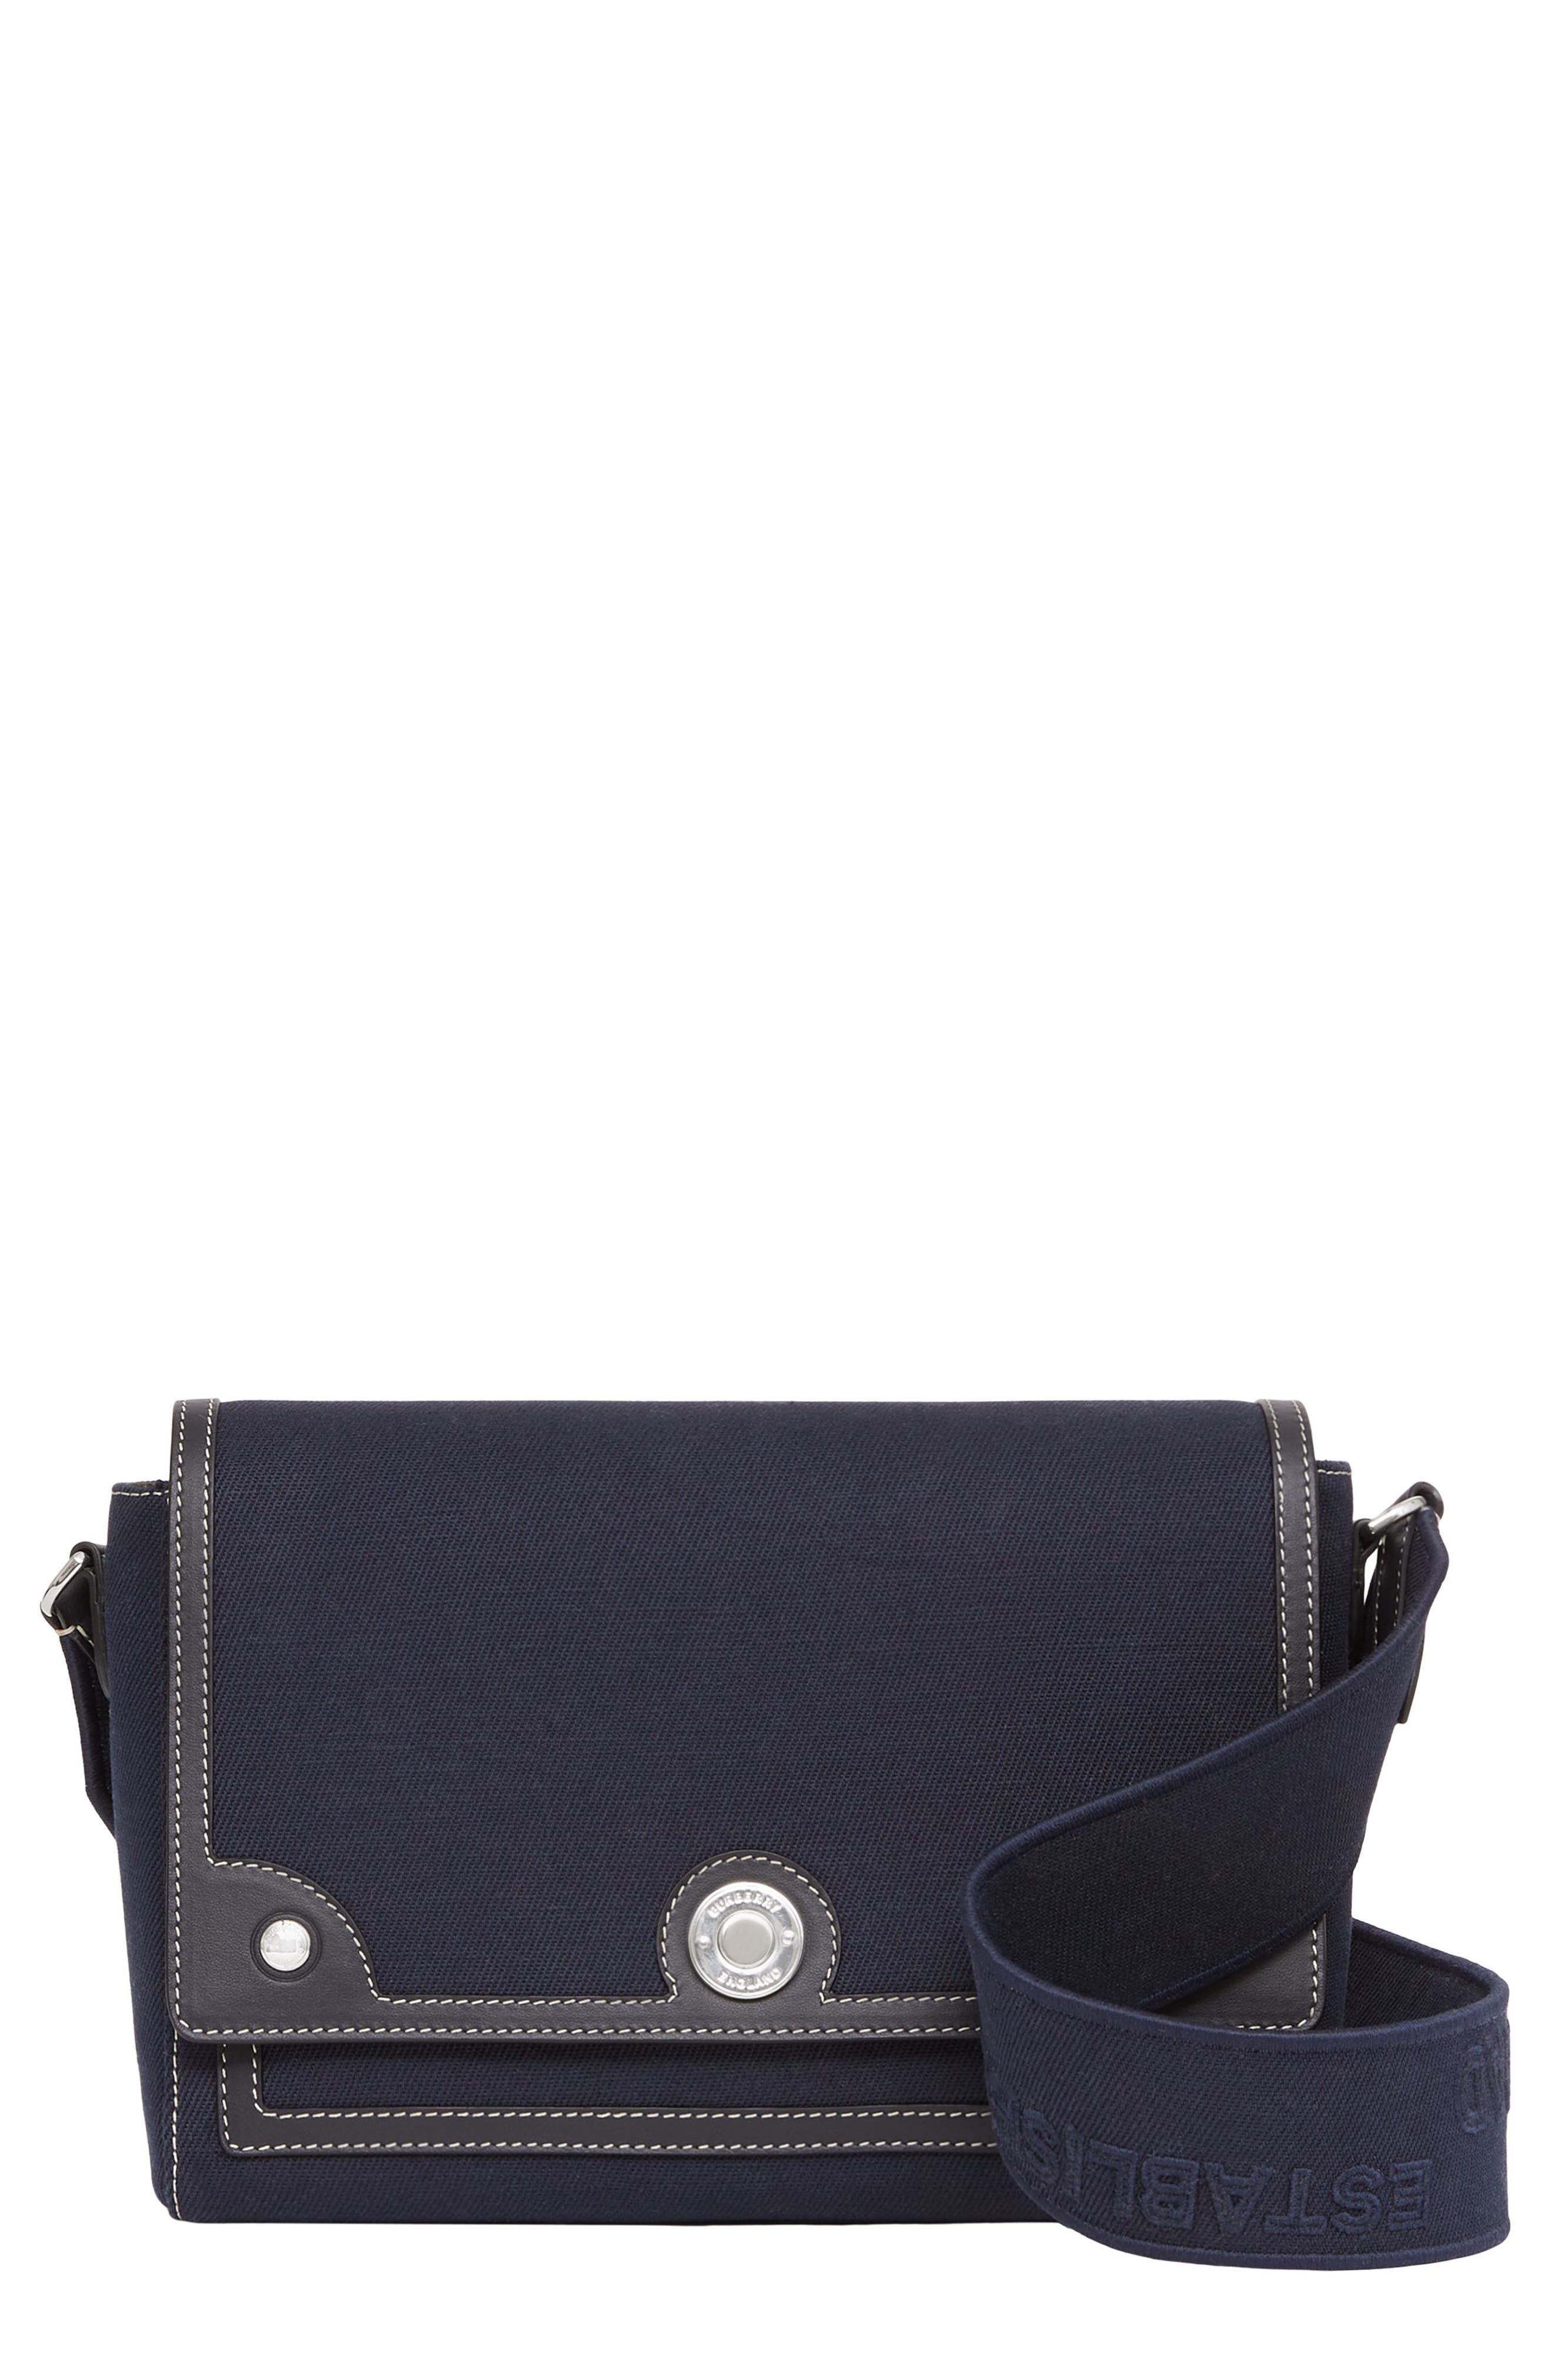 Burberry Medium Note Logo Strap Canvas & Leather Crossbody Bag in Navy at Nordstrom